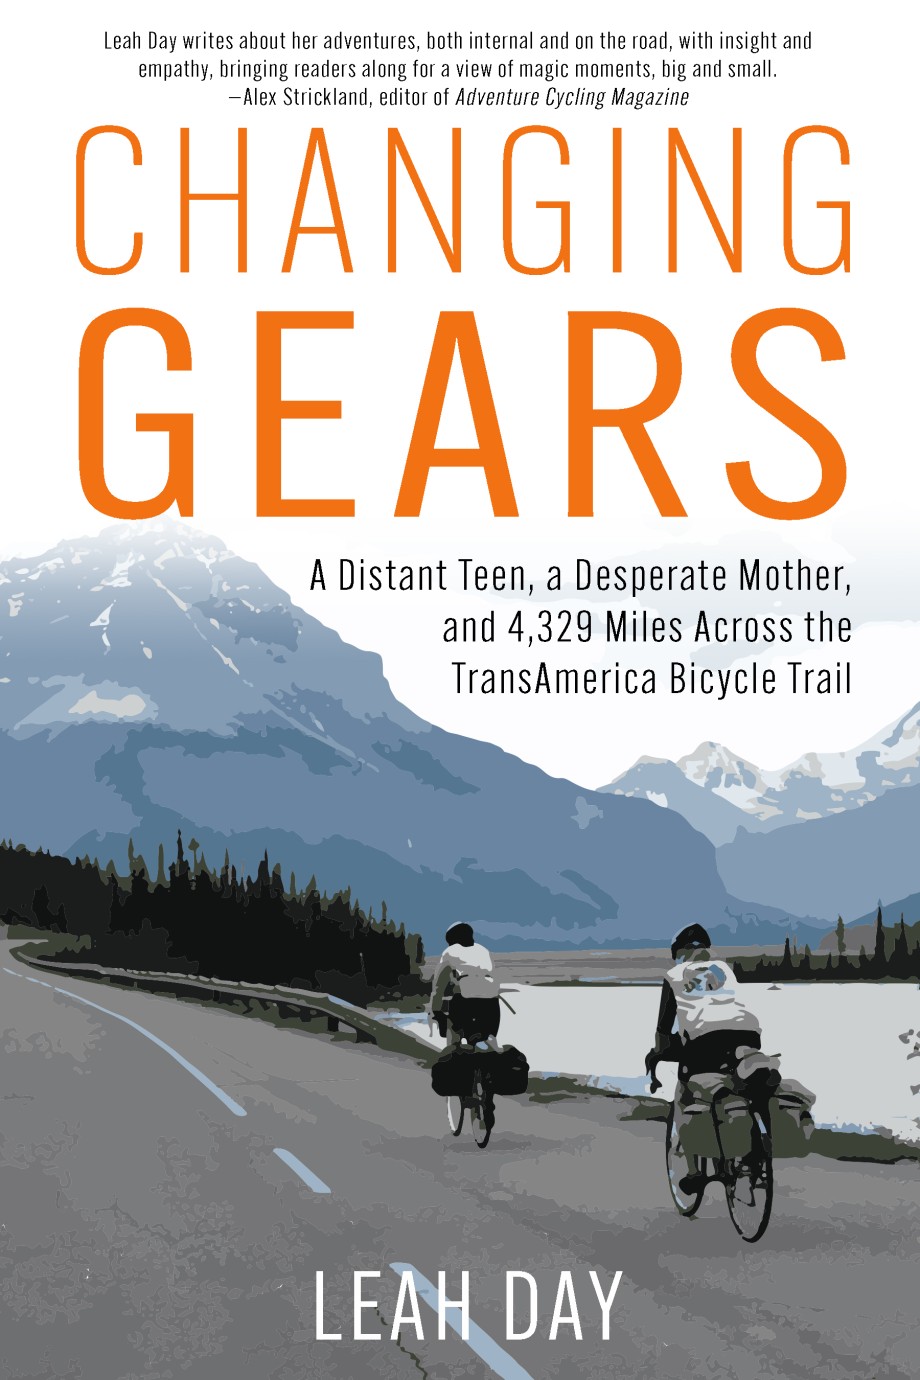 Changing Gears A Distant Teen, a Desperate Mother, and 4,329 Miles Across the Transamerica Bicycle Trail